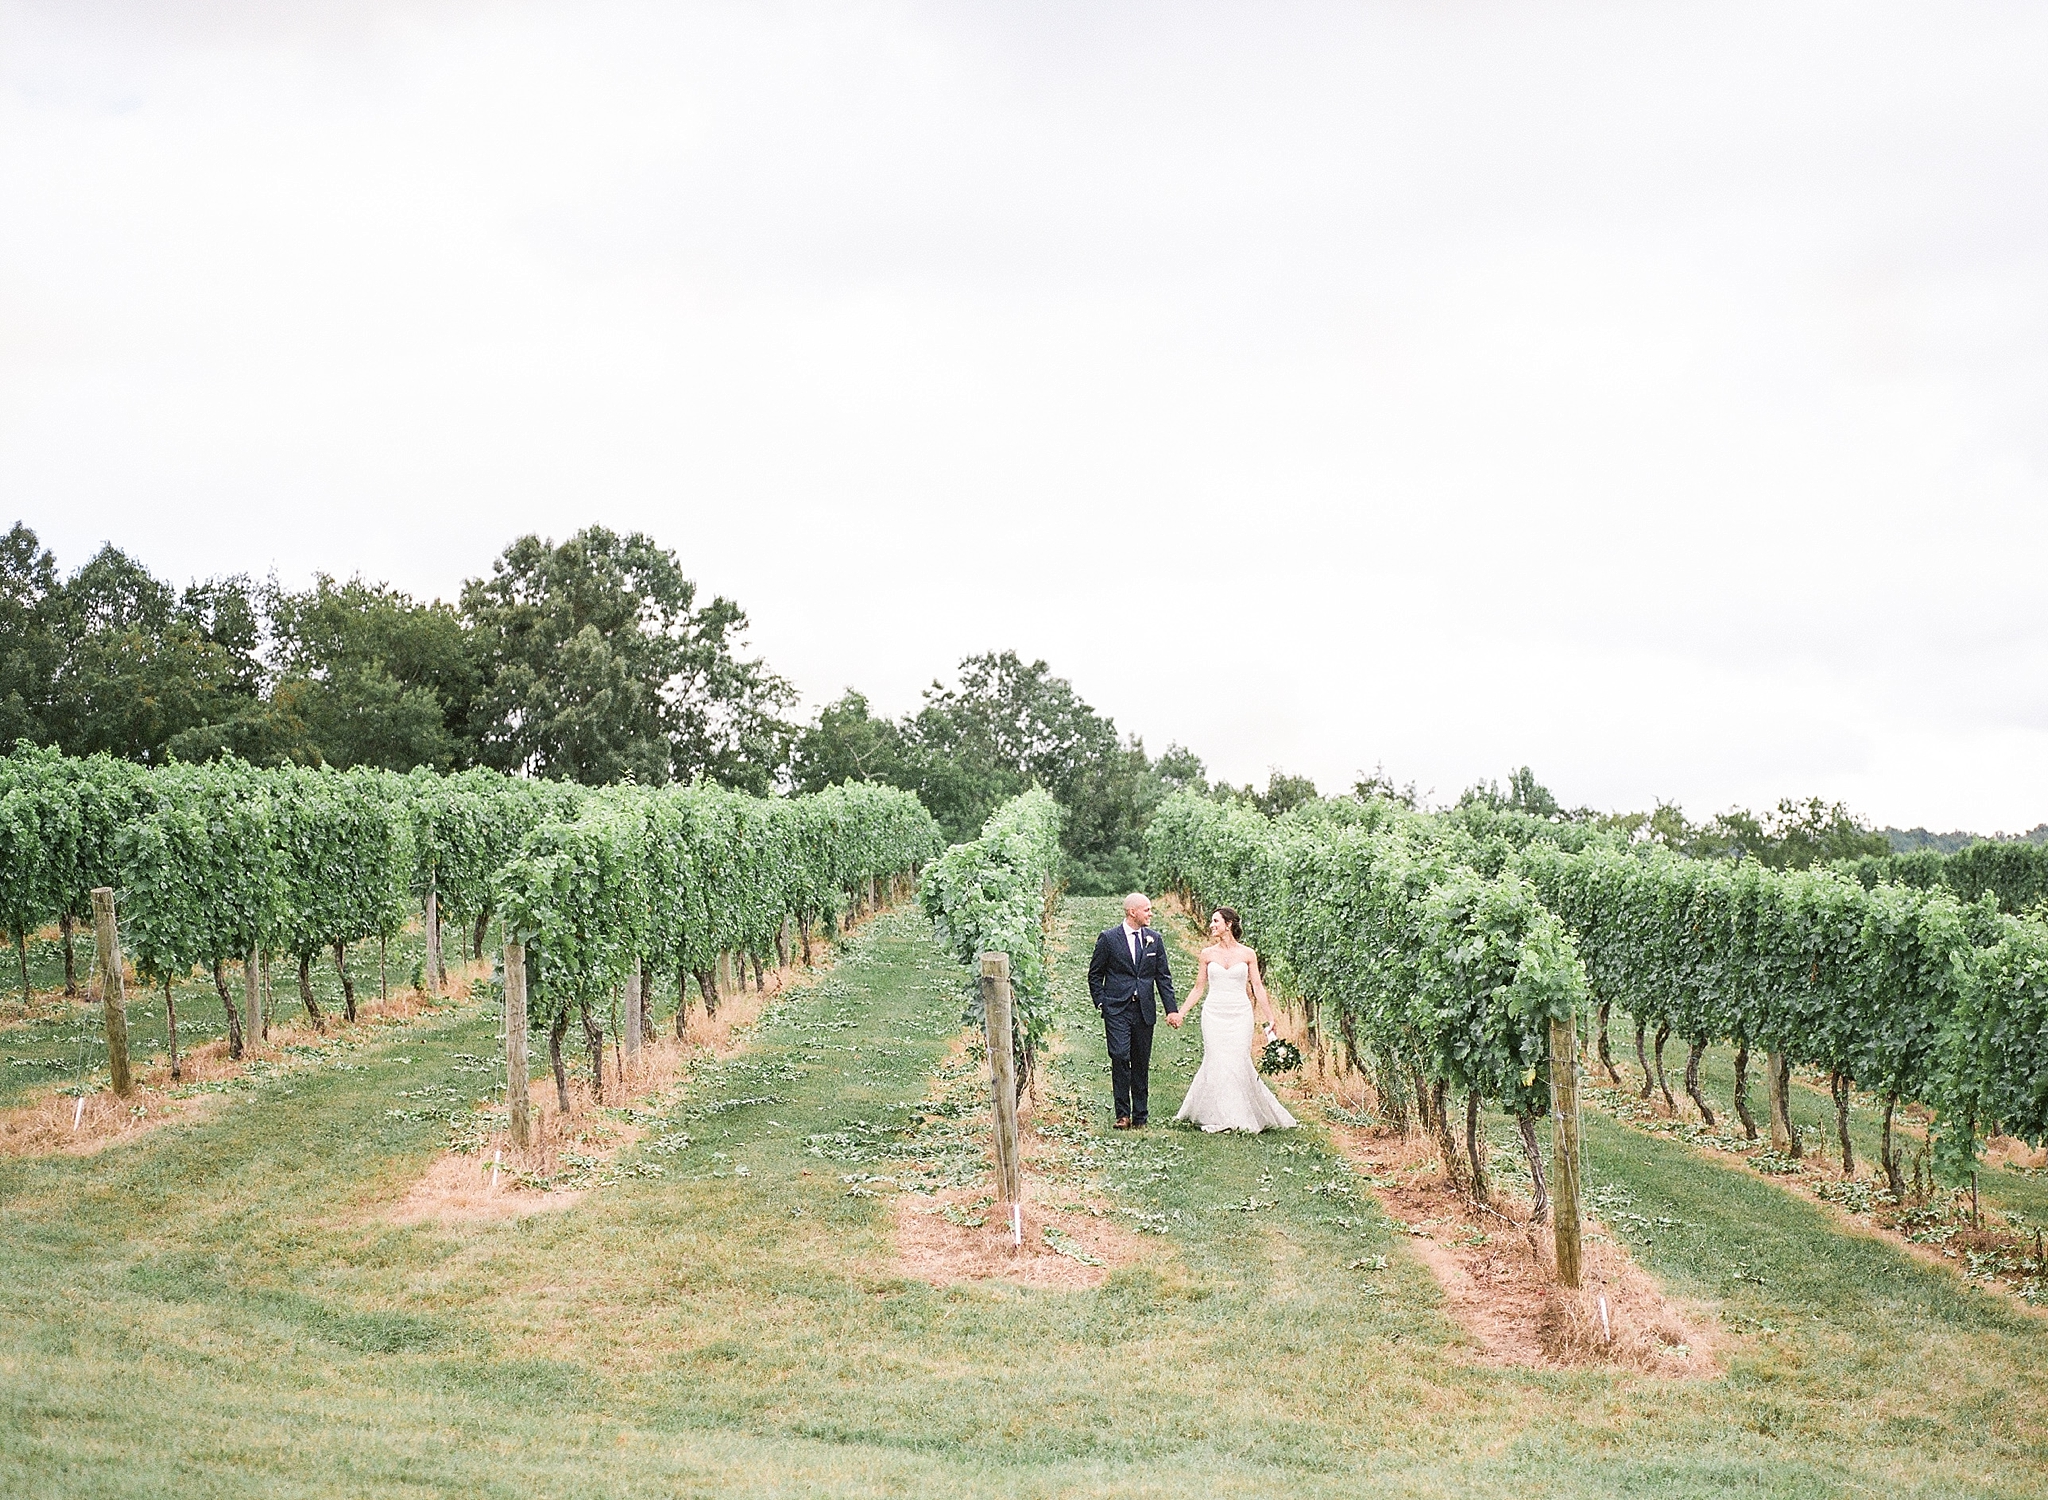 This elegant Pippin Hill wedding in Charlottesville, VA was designed by Amore Event Co and photographed by fine art film photographer, Alicia Lacey.